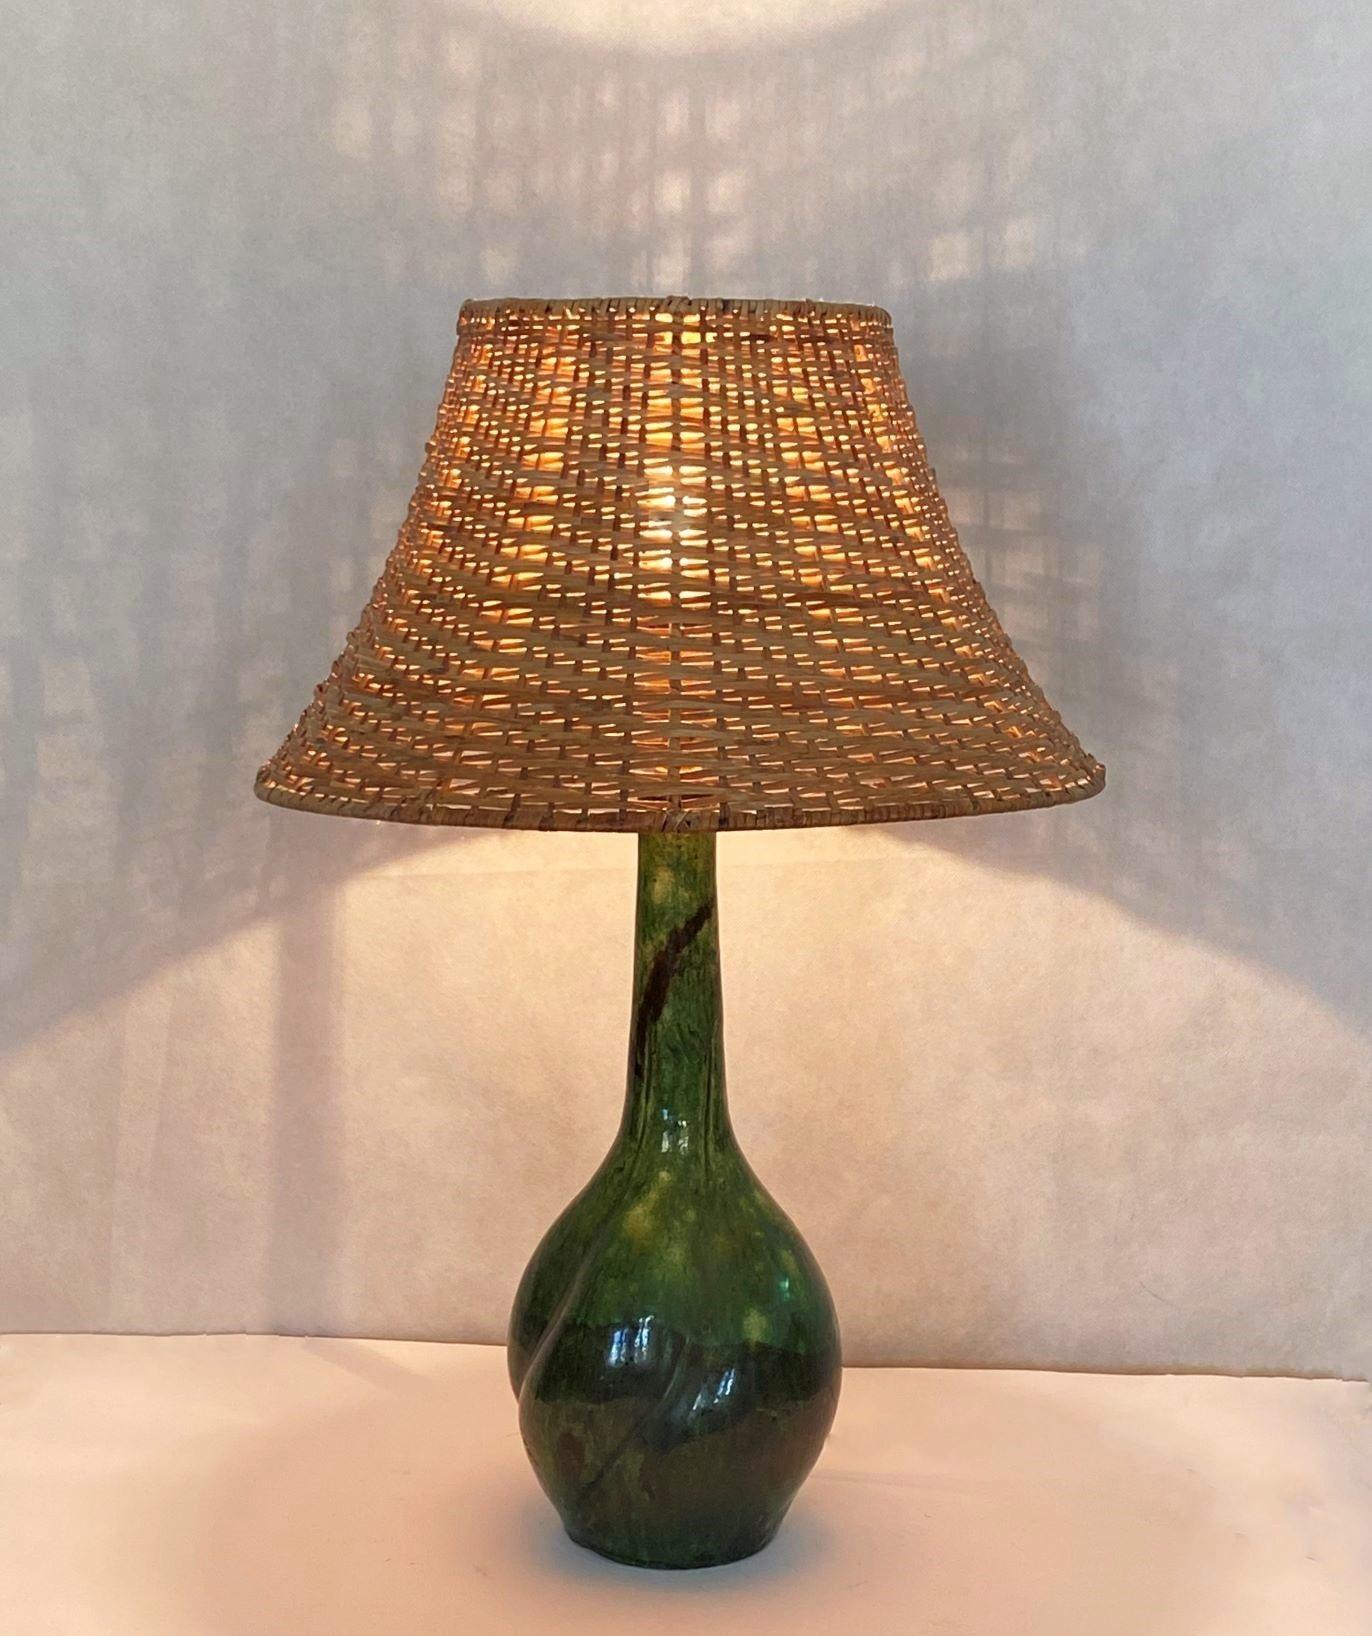 Danish Hand-Painted Glased Ceramic Table Lamp with Wicker Shade, 1960s For Sale 2